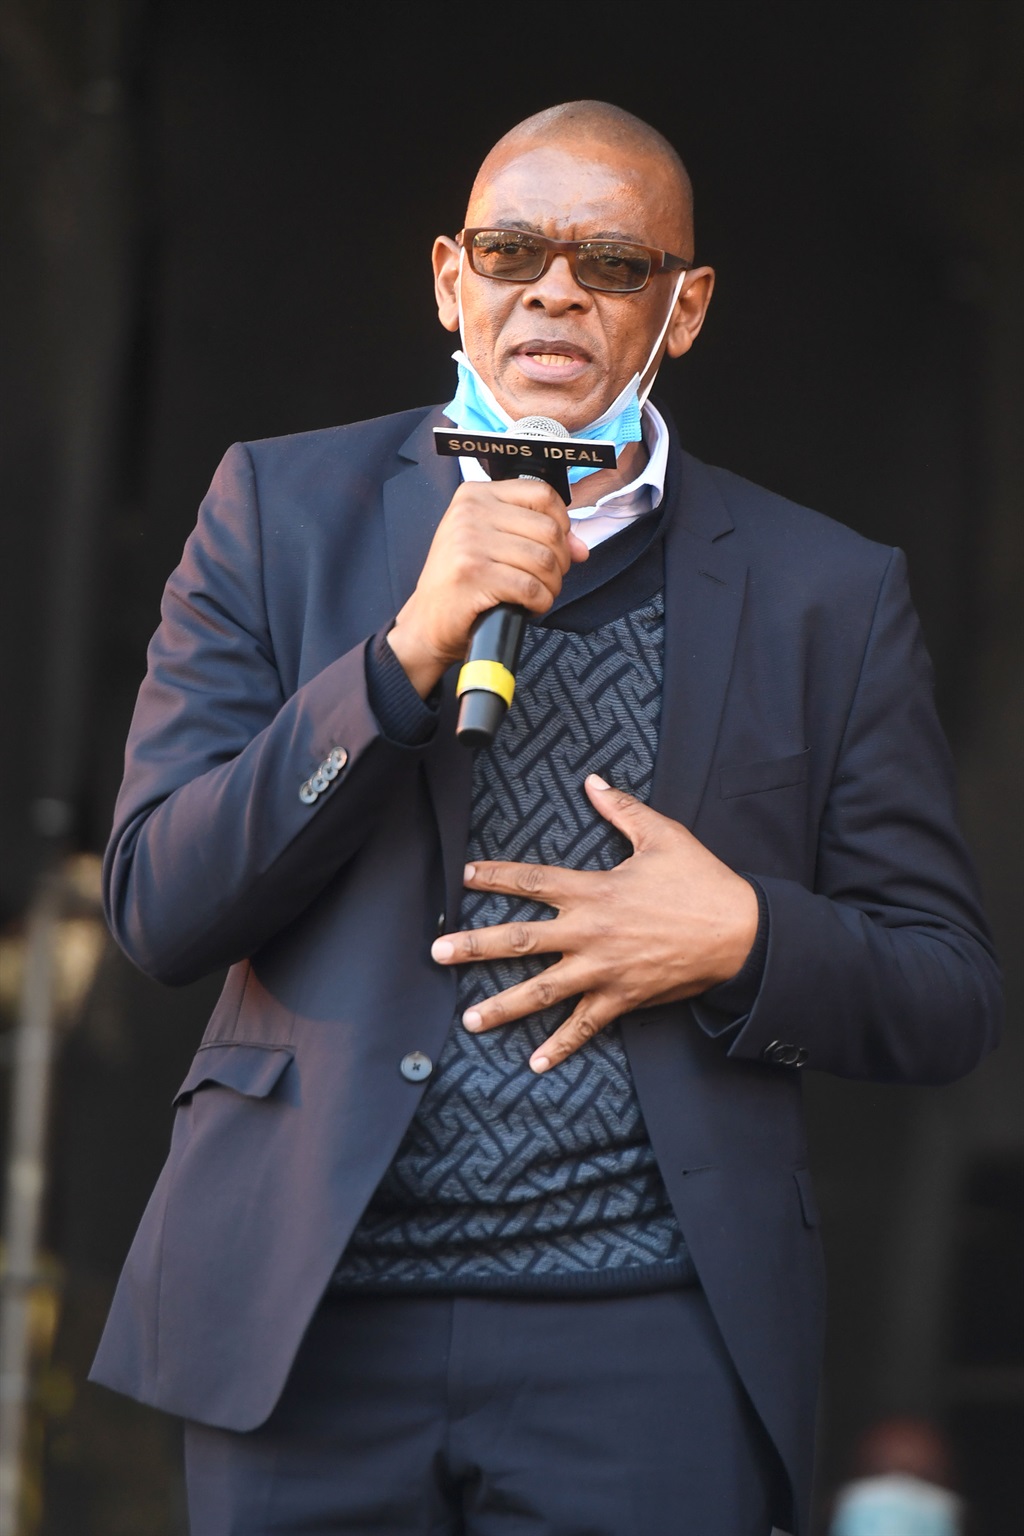 Ace Magashule addresses ANC supporters outside the Pietermaritzburg High Court on May 26, 2021 in Pietermaritzburg, South Africa. It is reported that Zuma appeared in court on charges of fraud related to the arms scandal transactions. (Photo by Gallo Images/Beeld/Deaan Vivier)